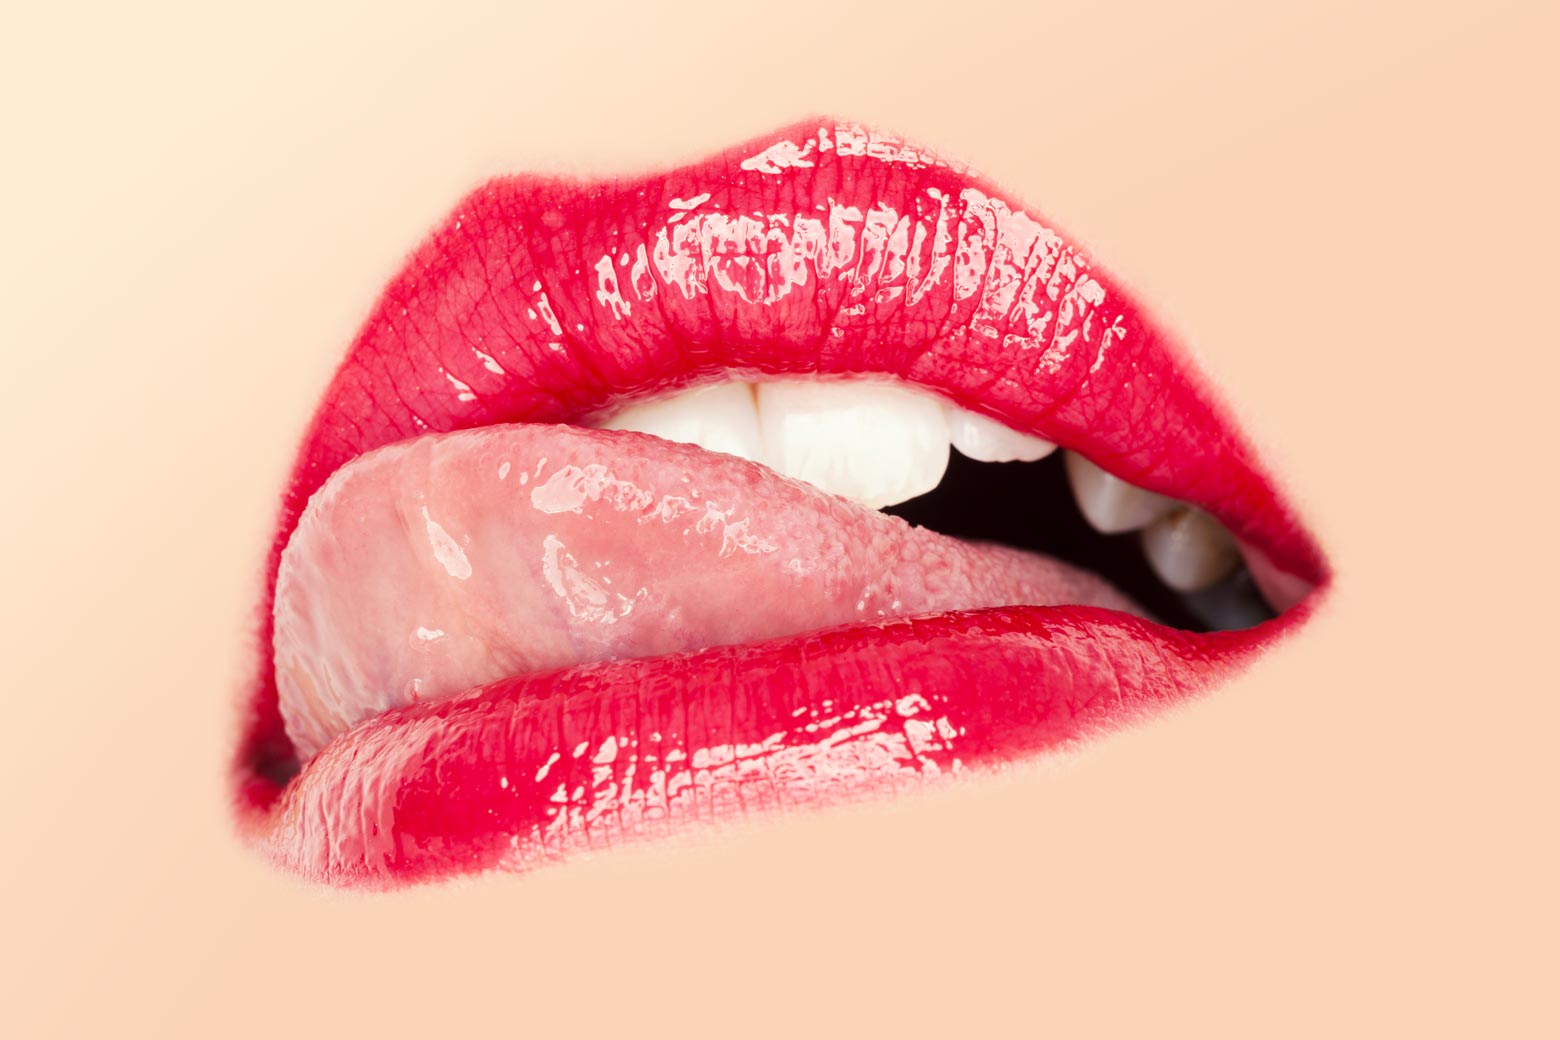 Close-up on the mouth of a woman licking her red glossy lips